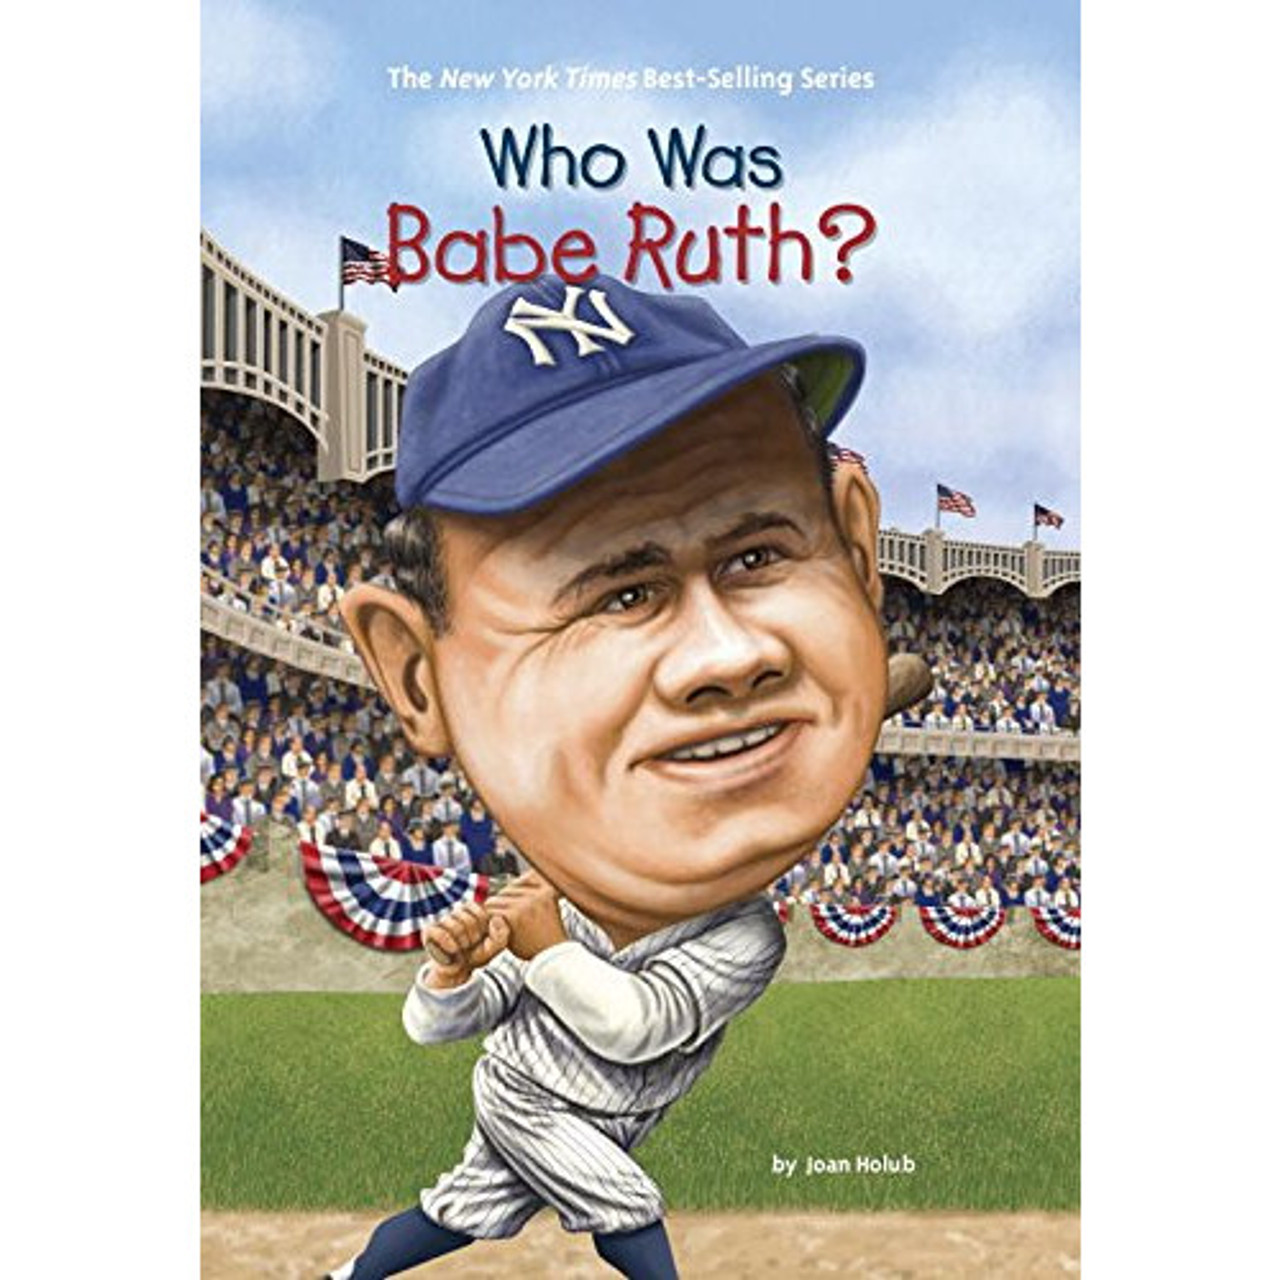 Did Babe Ruth Have Dominican Ancestry?